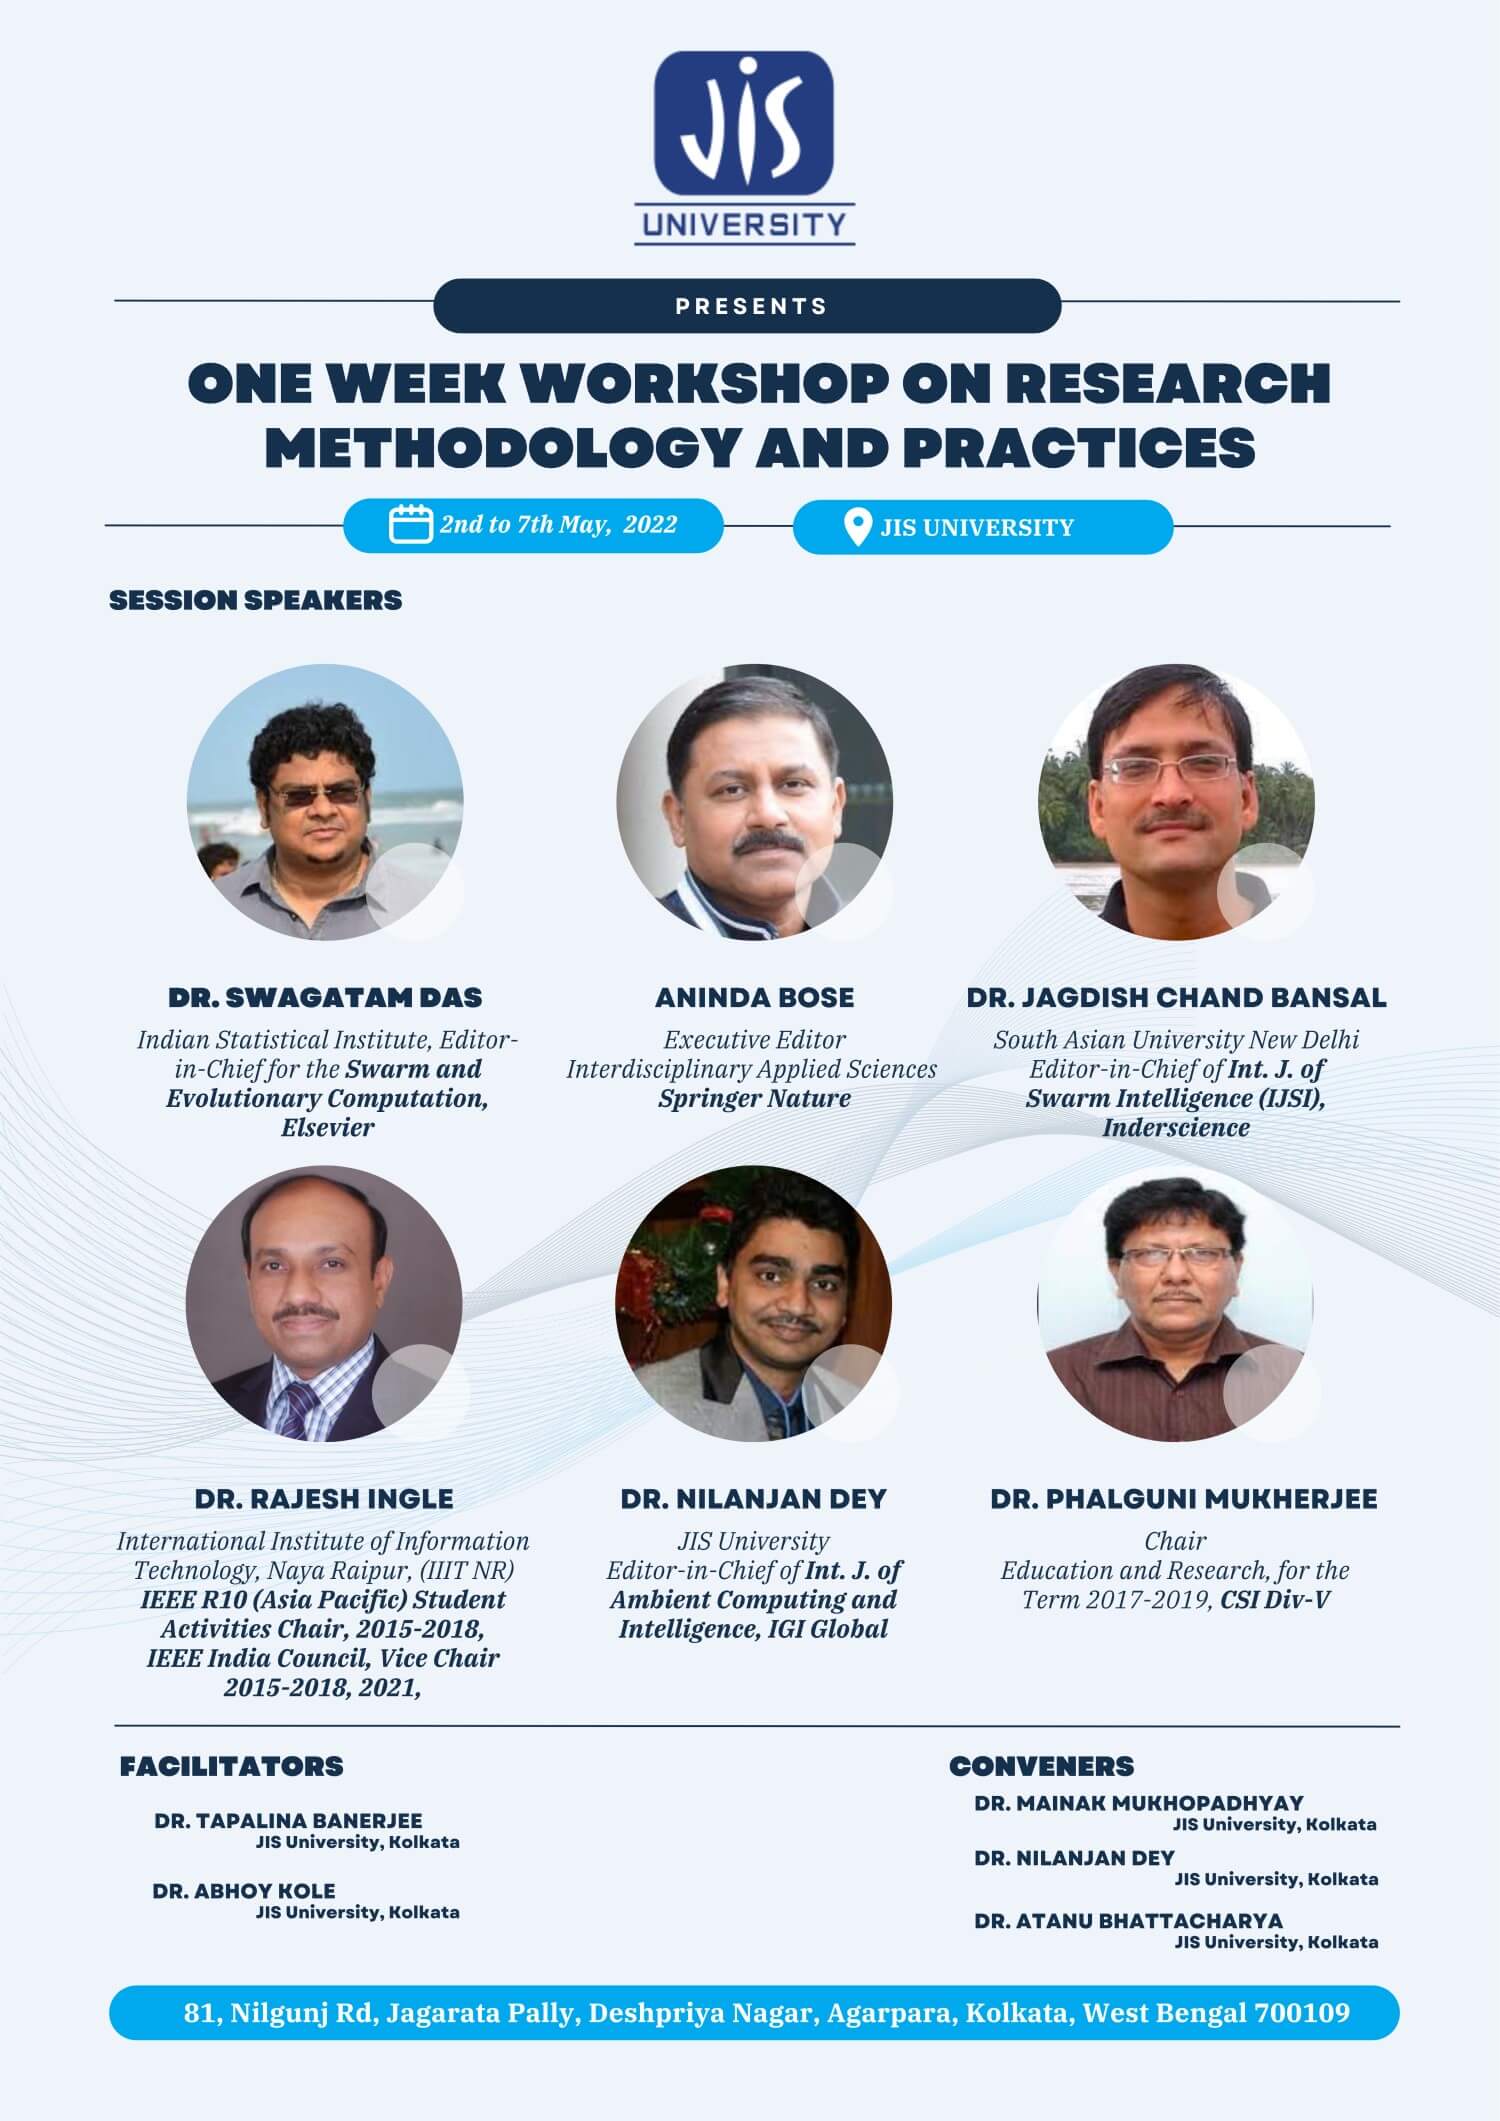 One Week Workshop on Research Methodology and Practices